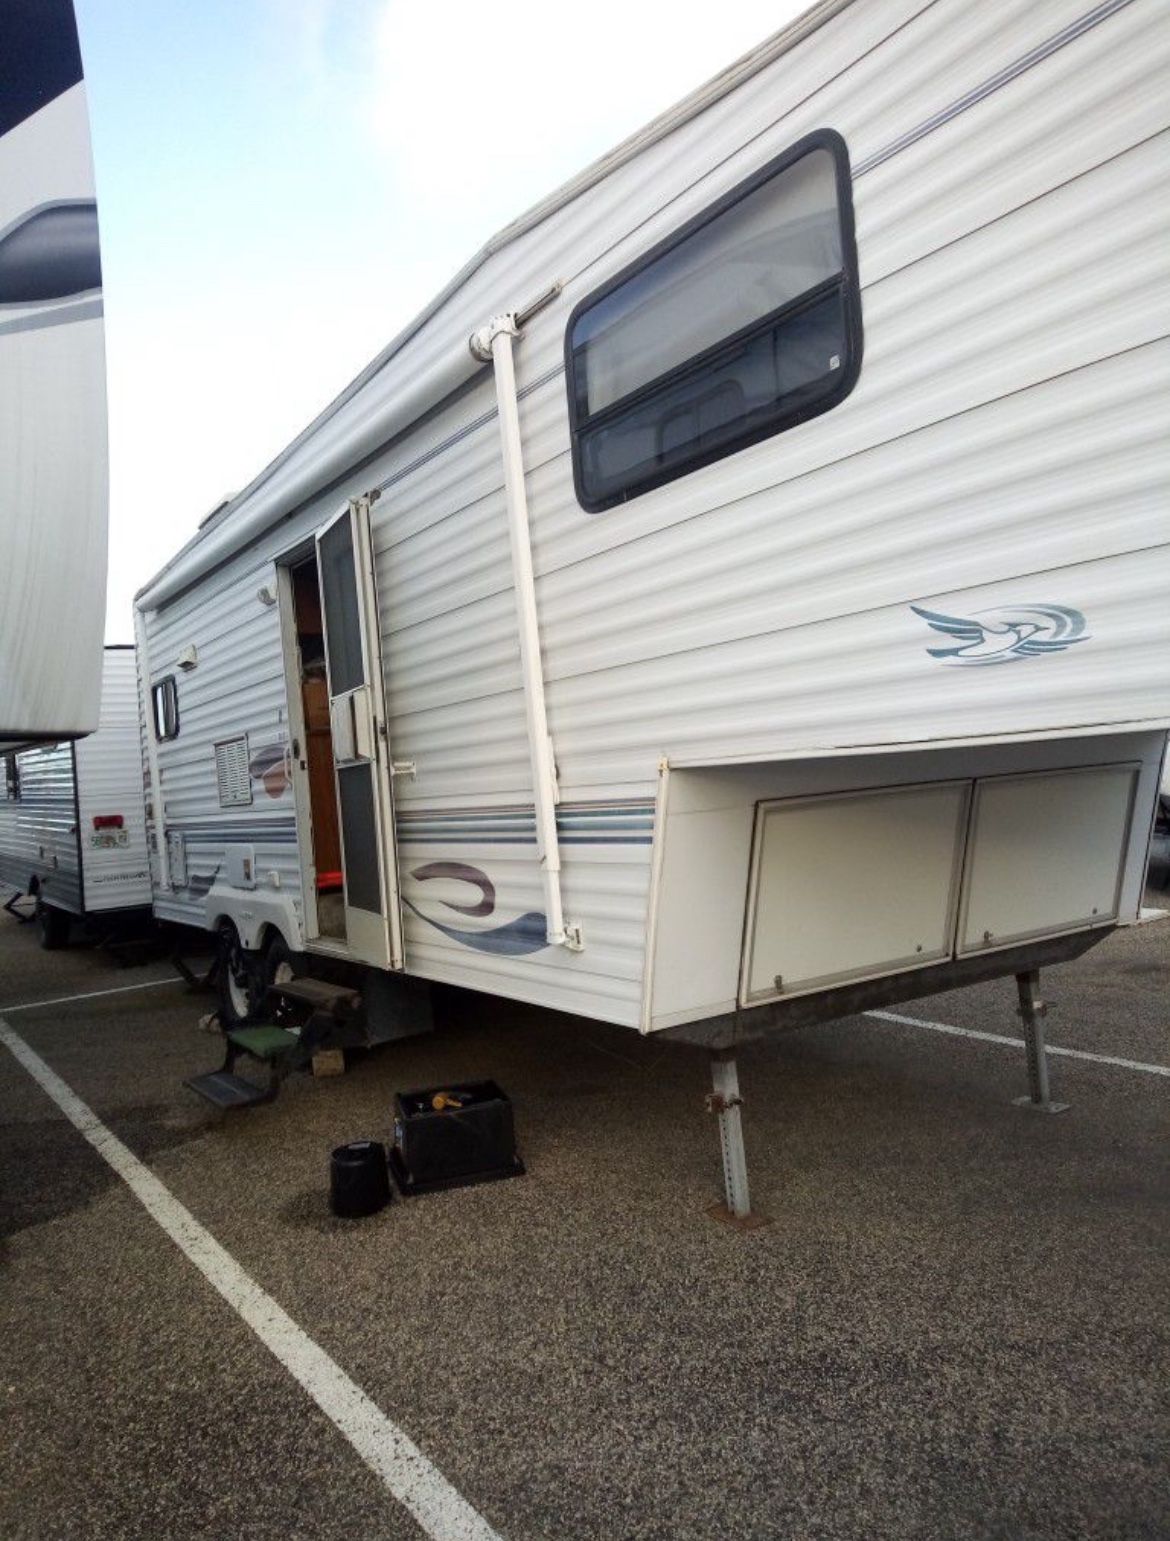 Live In This Jayco 2000 Travel Trailer Or Use Your Own 